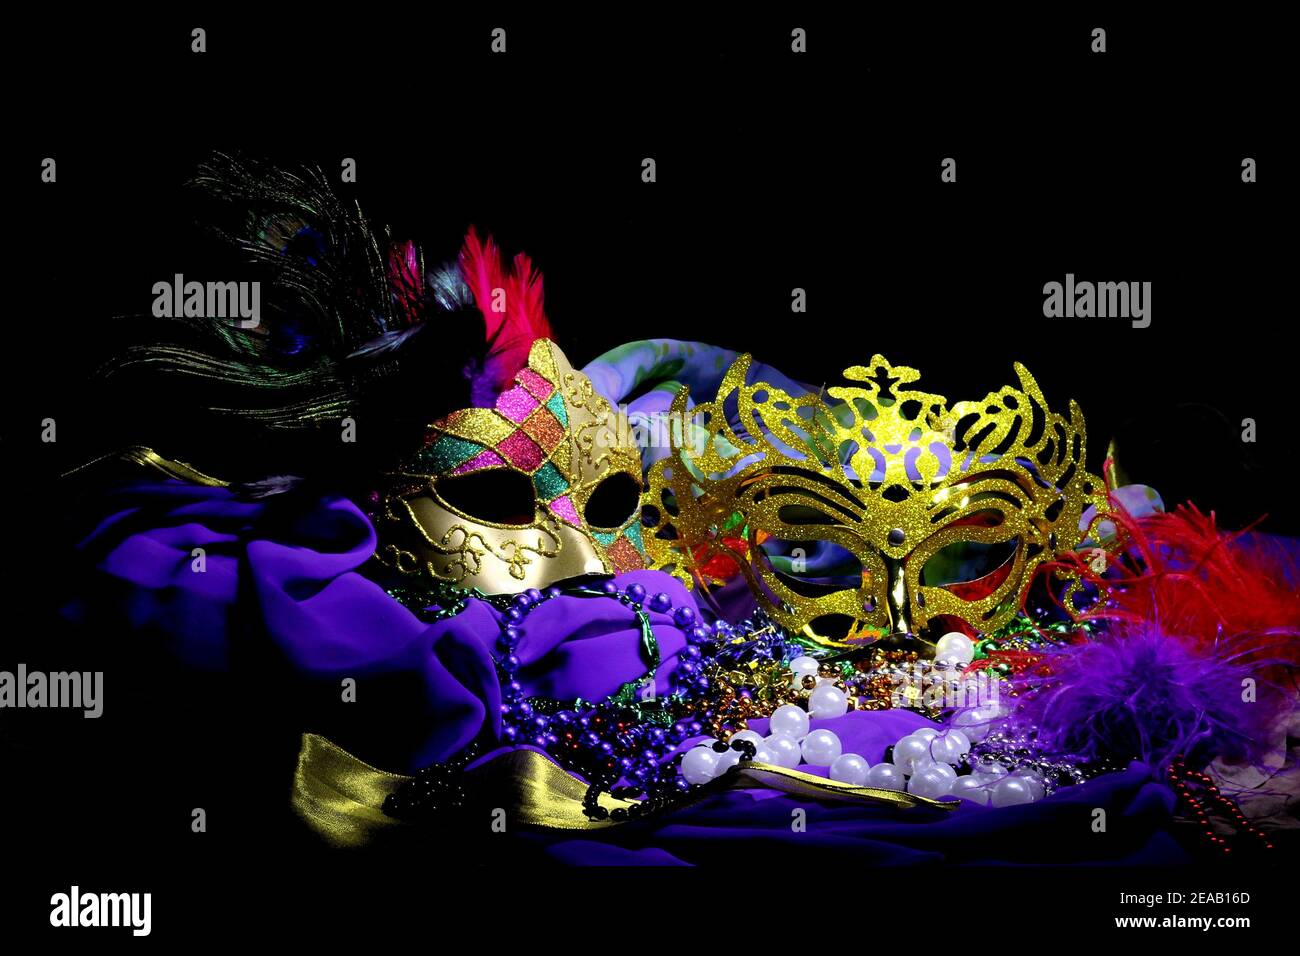 Two ornate gold masks with feathers and satin fabric sit in a colorful still life arrangement. Stock Photo